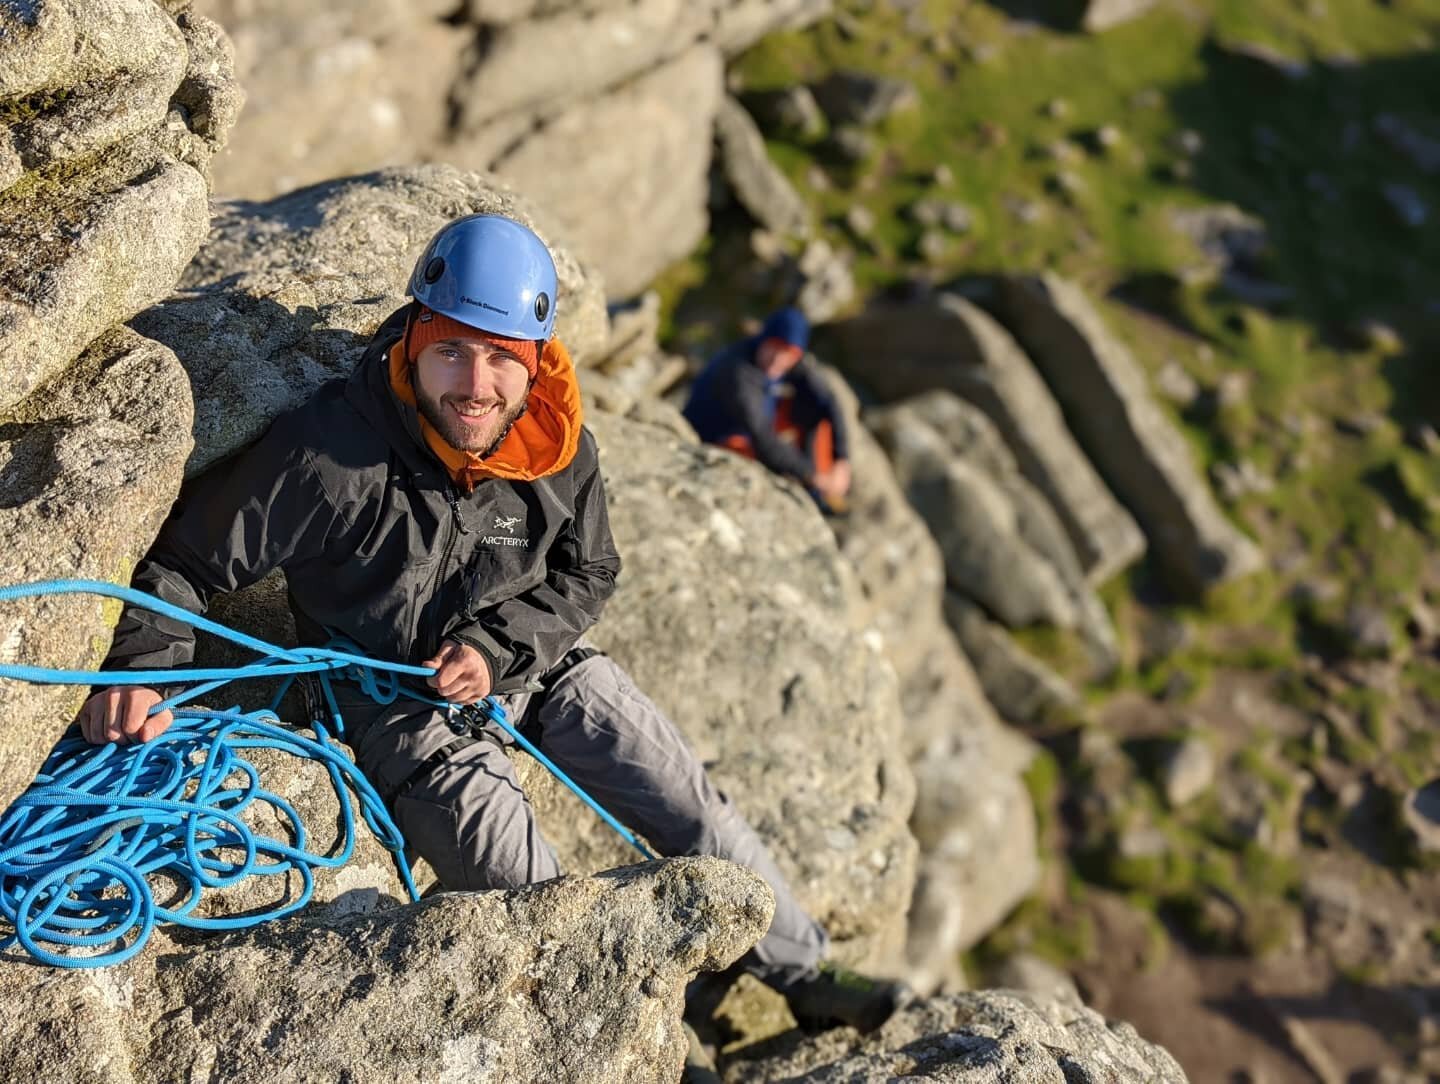 This weekend was spent running a two day indoor to outdoor lead climbing course focusing on trad climbing

Day 1 was spent at @the_quay_climbing_centre focusing on lead climbing fundamentals

Day 2 was spent at Hound Tor introducing placing gear, set